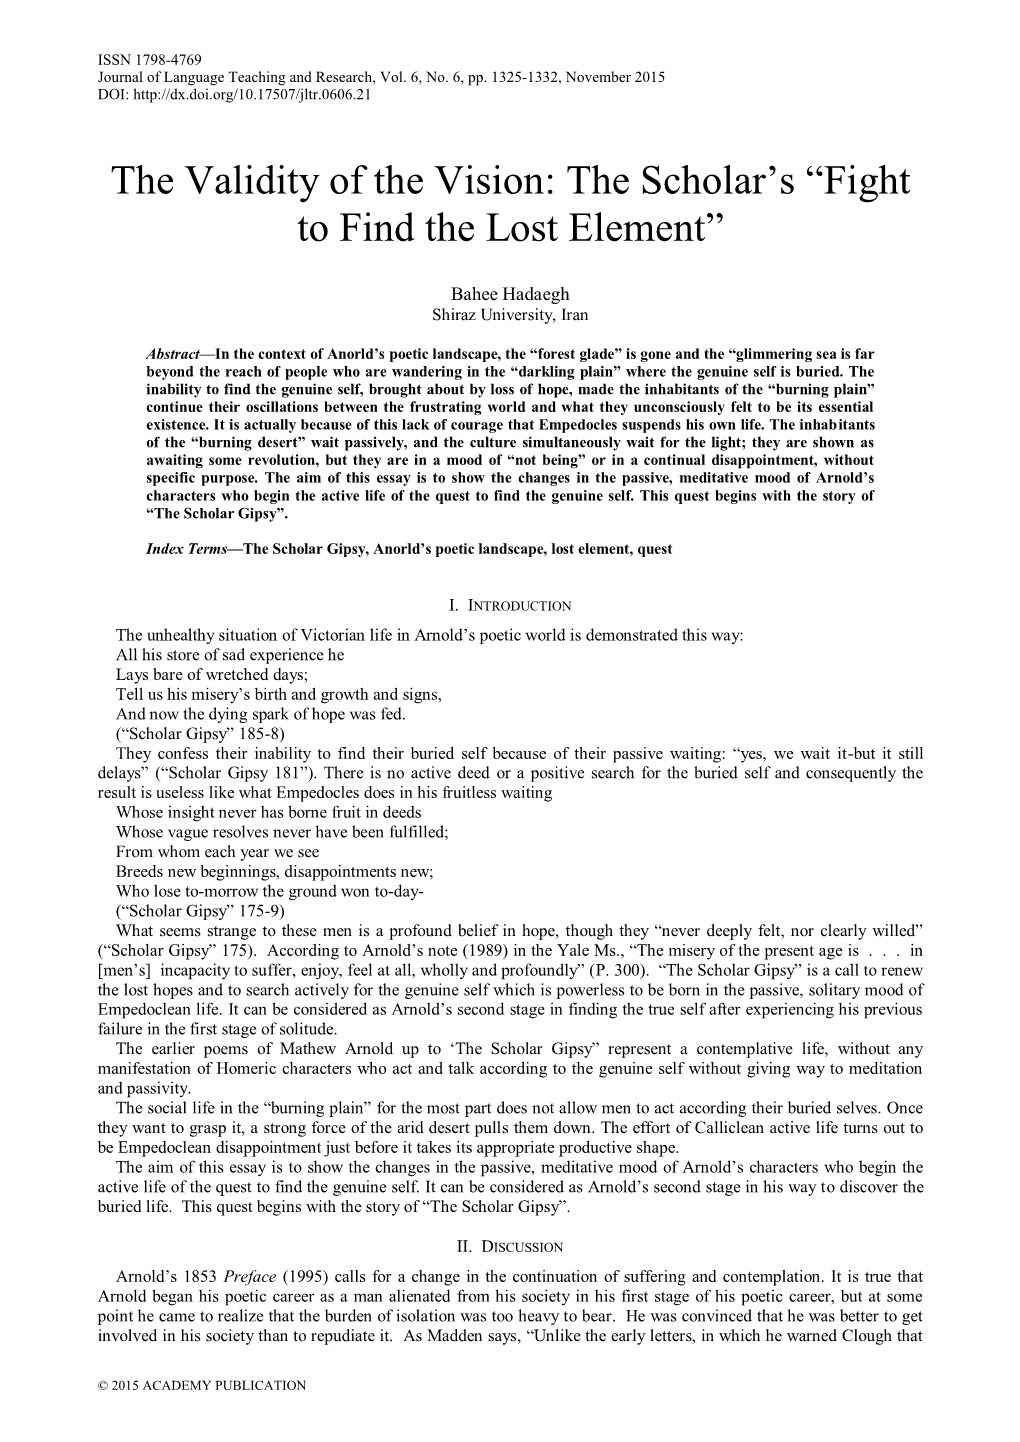 The Scholar's “Fight to Find the Lost Element”